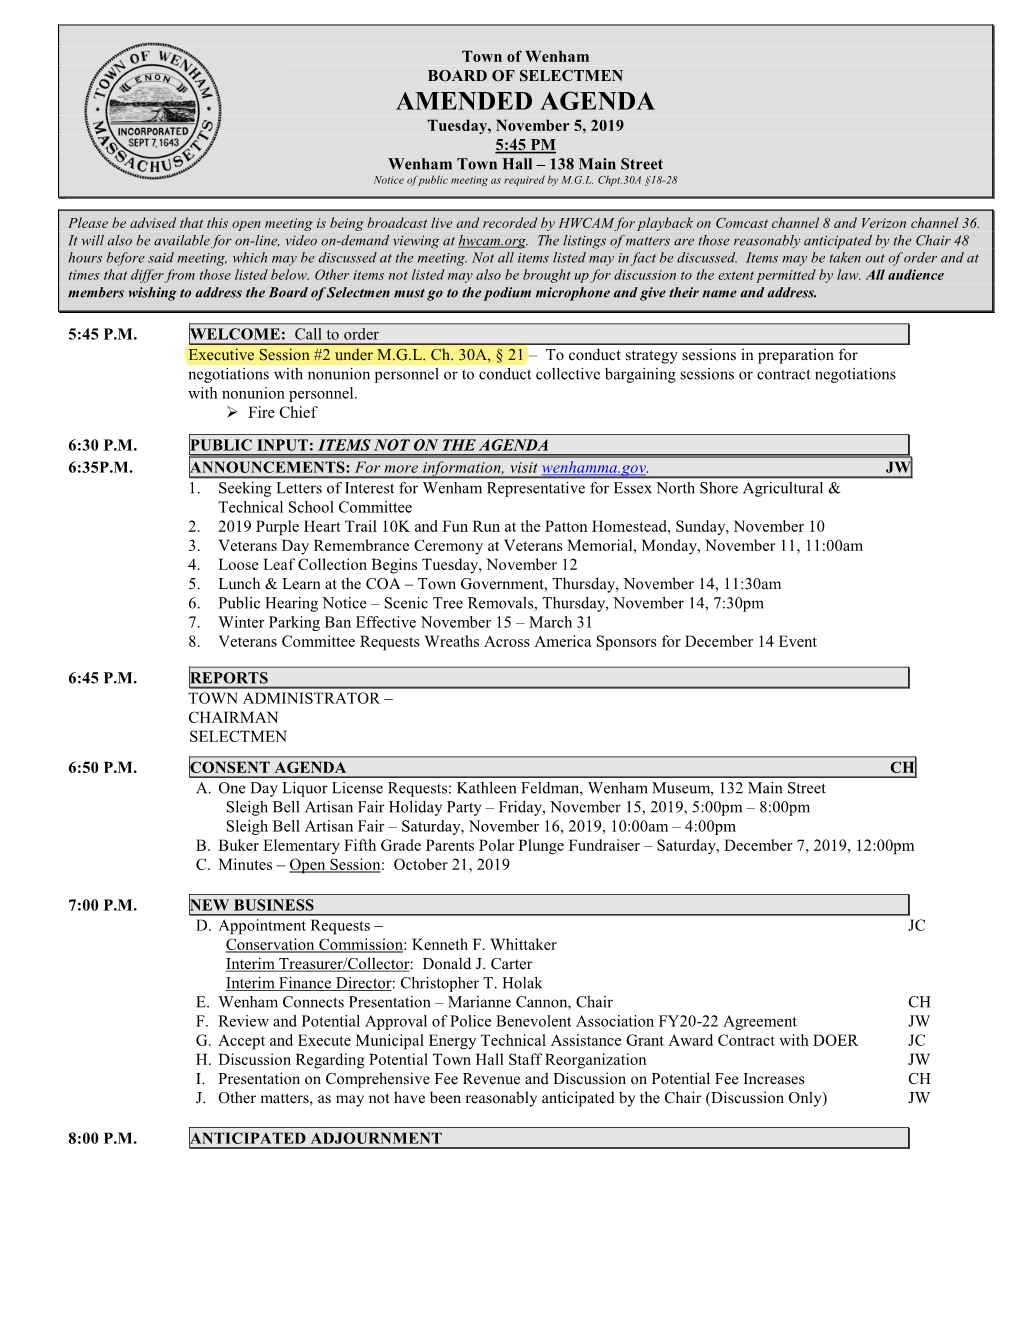 AMENDED AGENDA Tuesday, November 5, 2019 5:45 PM Wenham Town Hall – 138 Main Street Notice of Public Meeting As Required by M.G.L